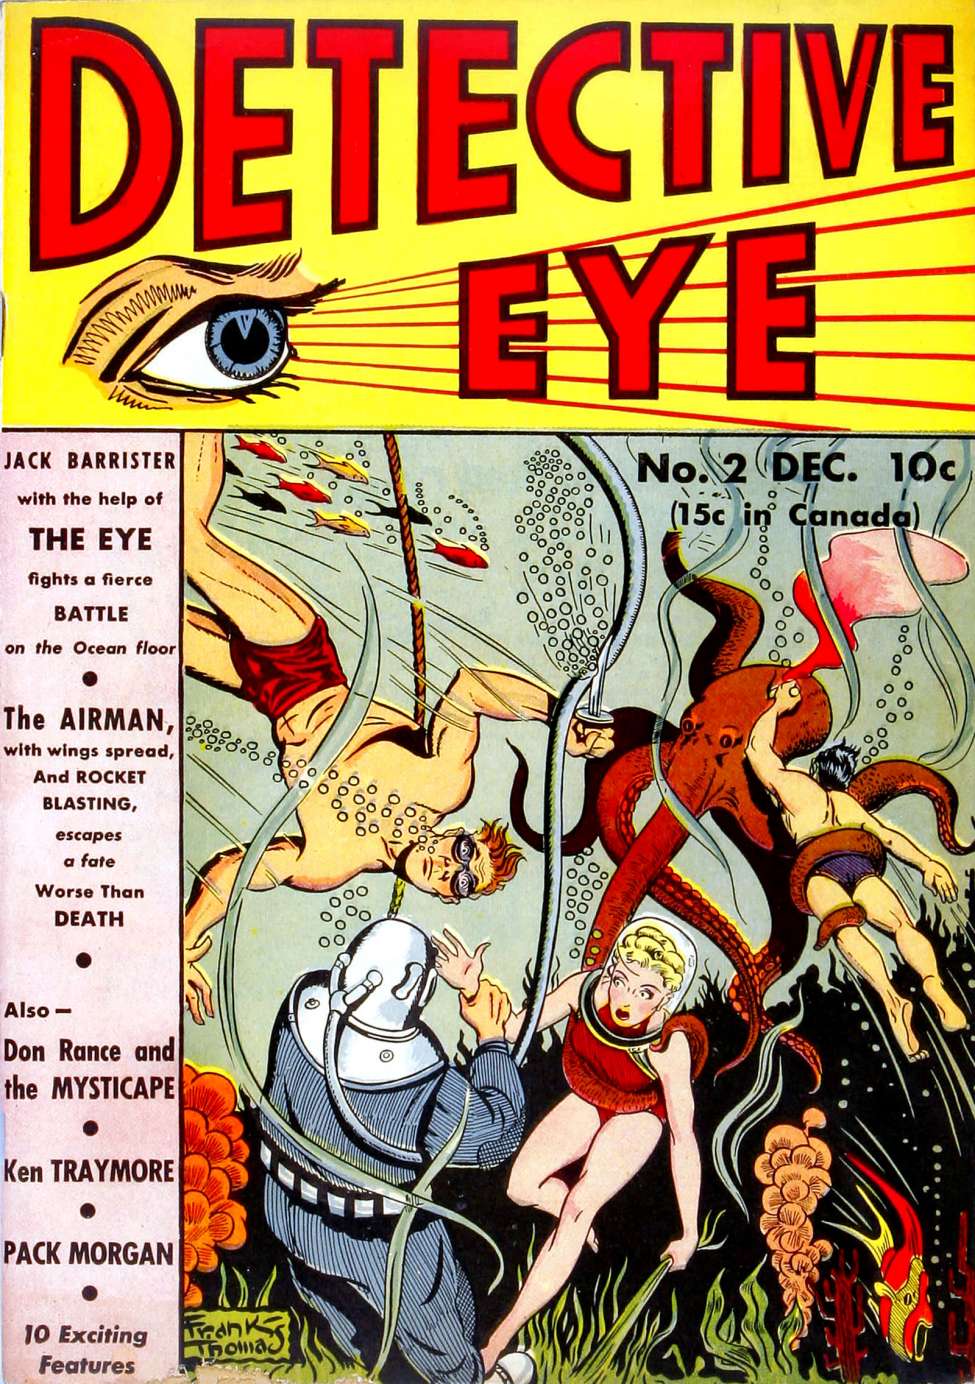 Book Cover For Detective Eye 2